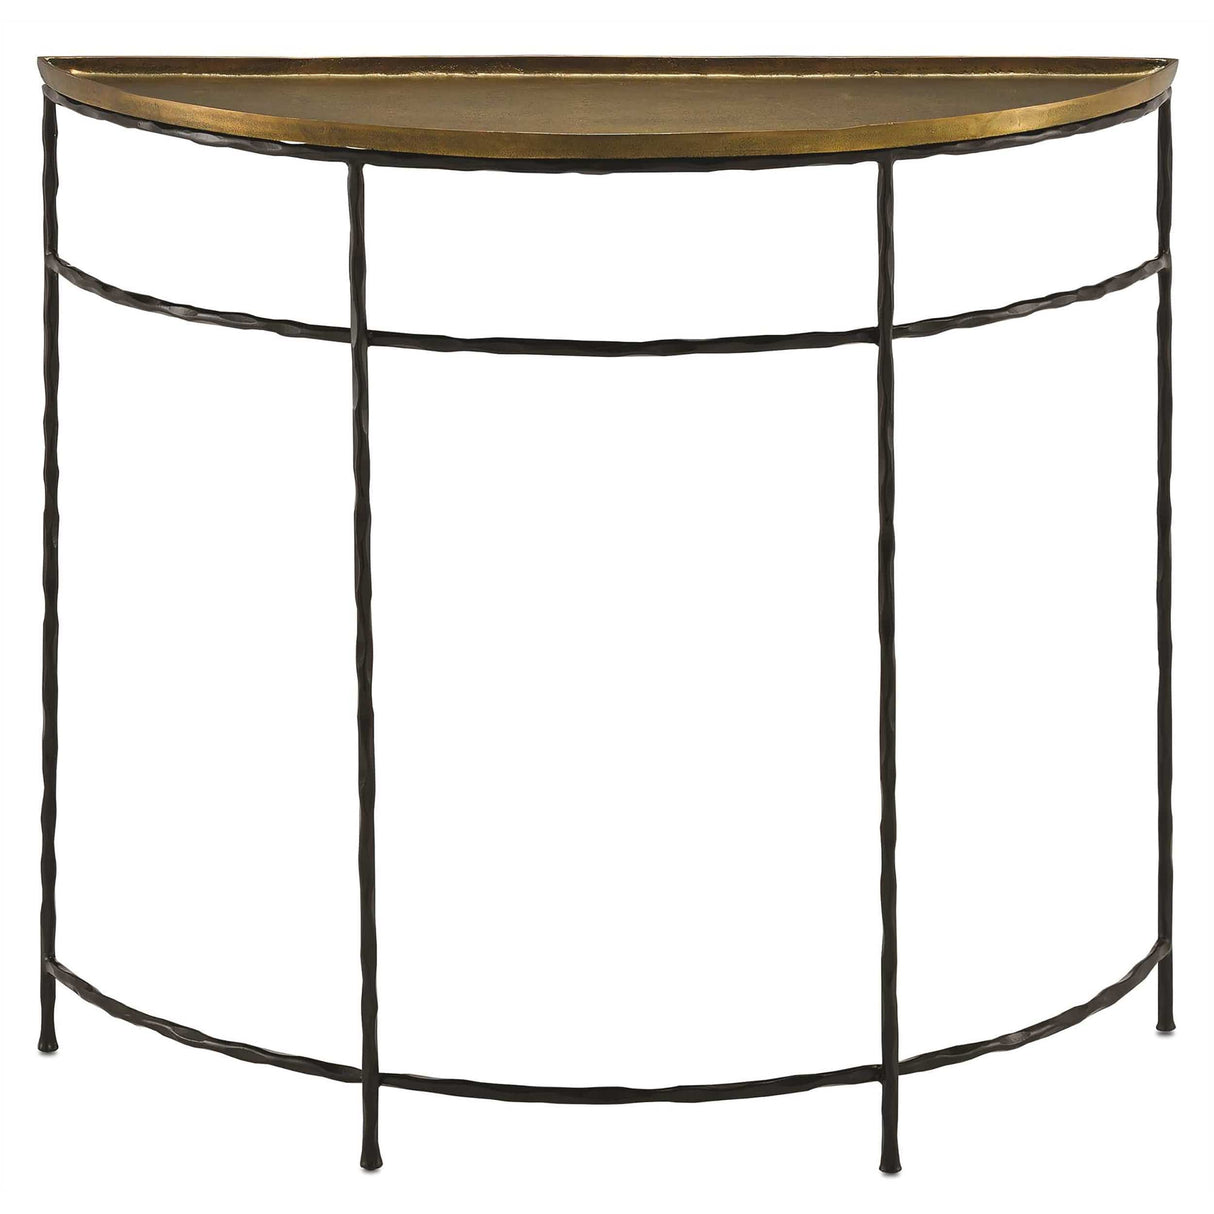 Currey and Company Boyles Demilune Console Furniture currey-co-4000-0053